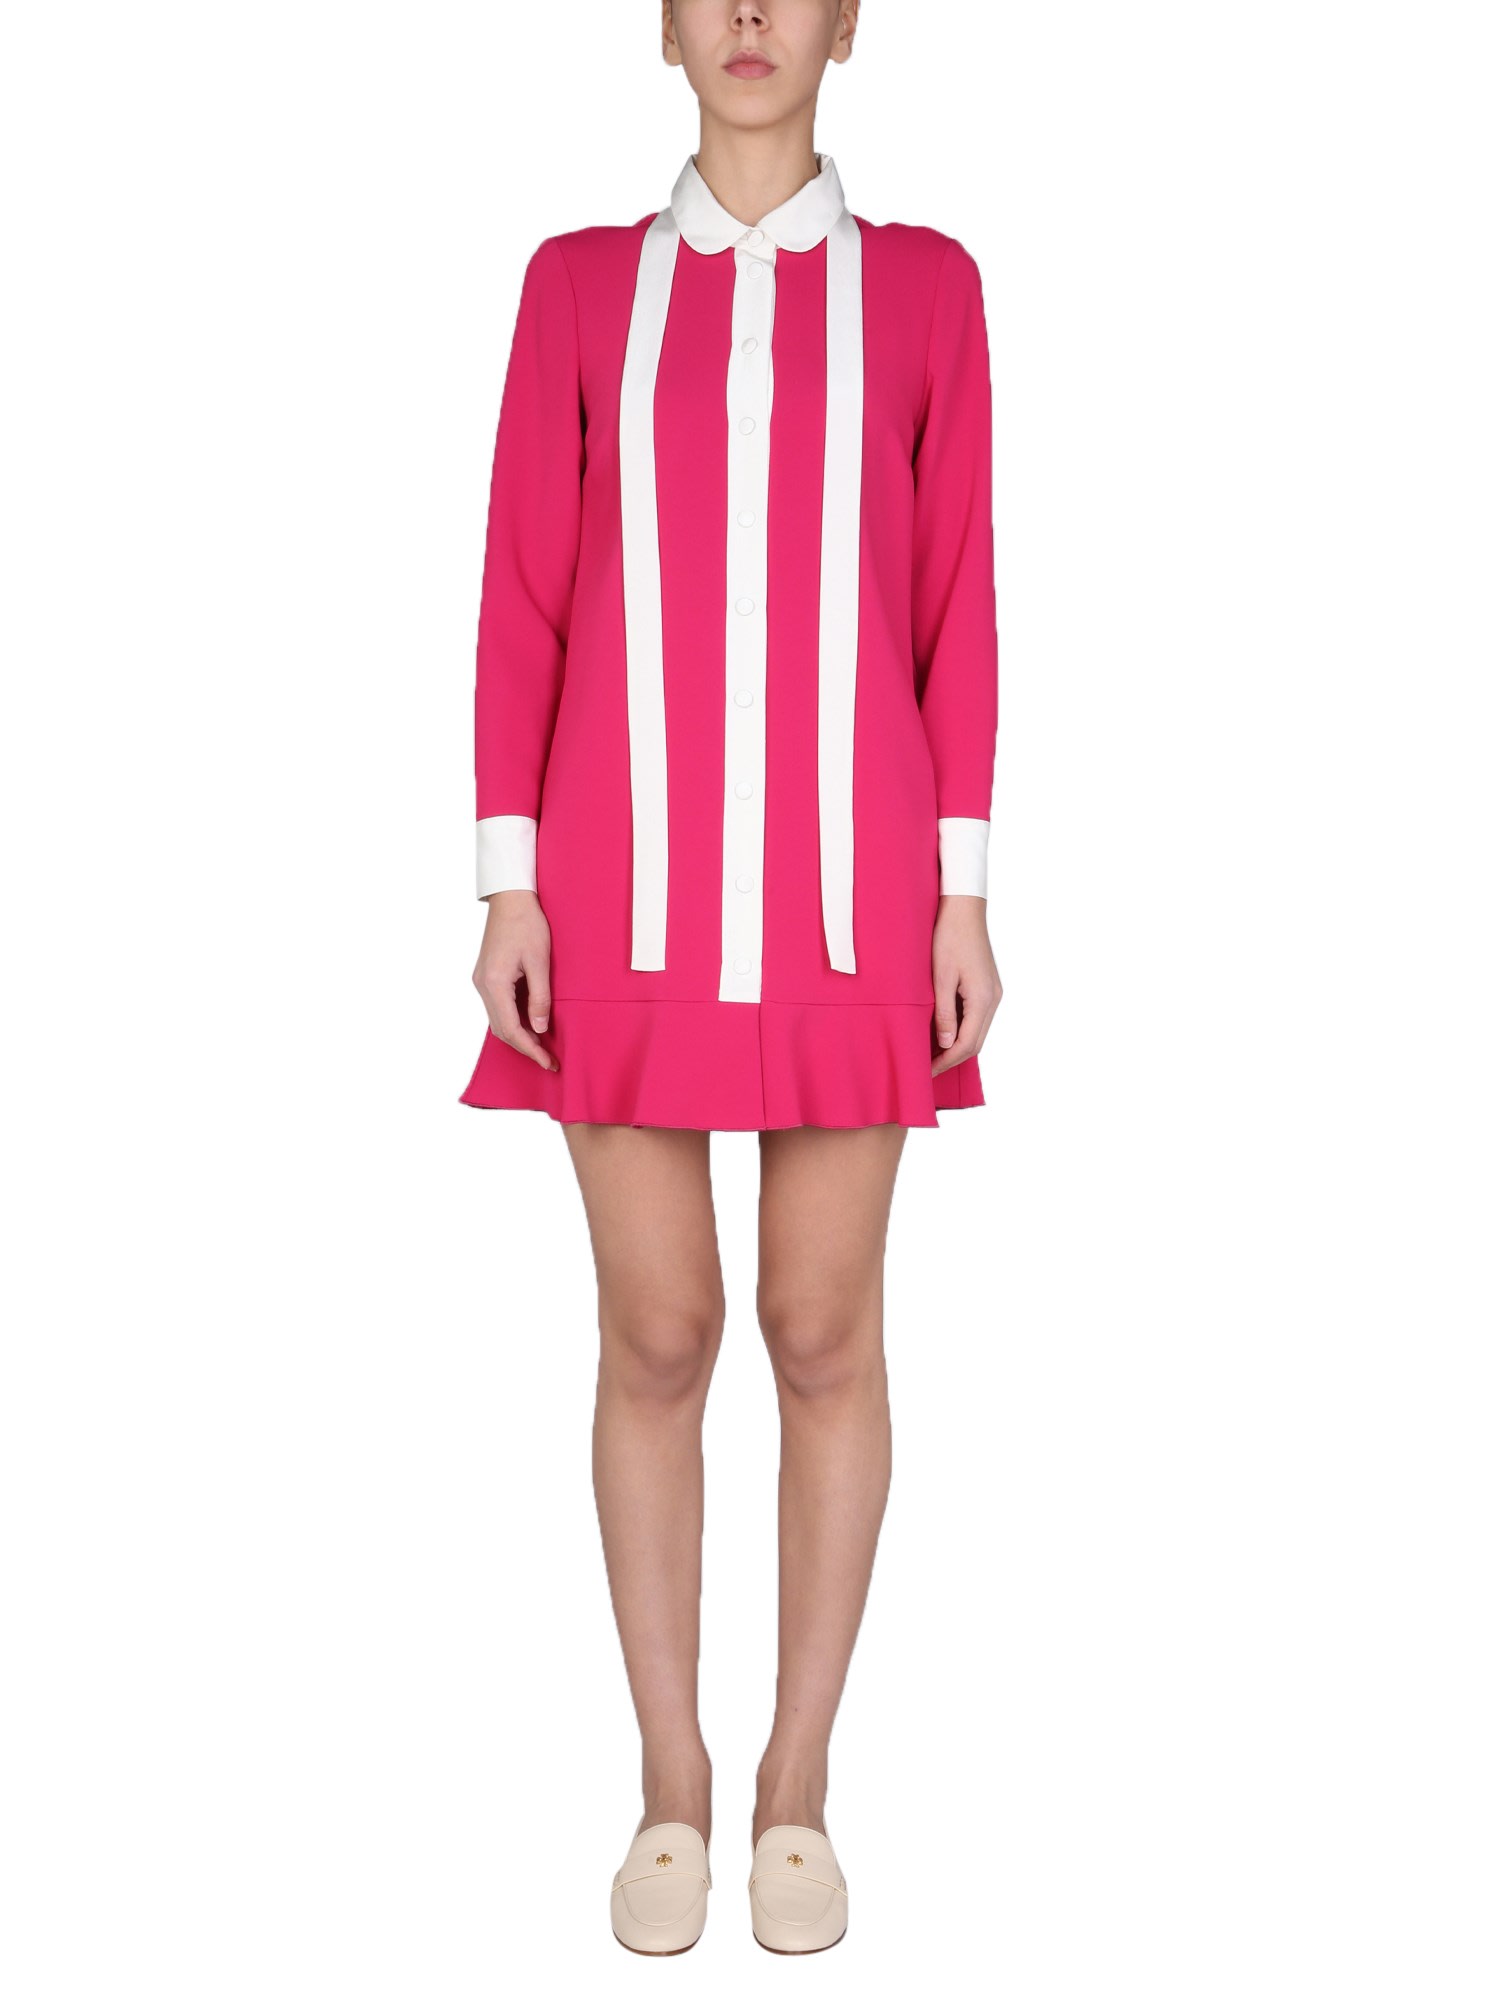 RED Valentino Dress With Stretch Frisottine Collar